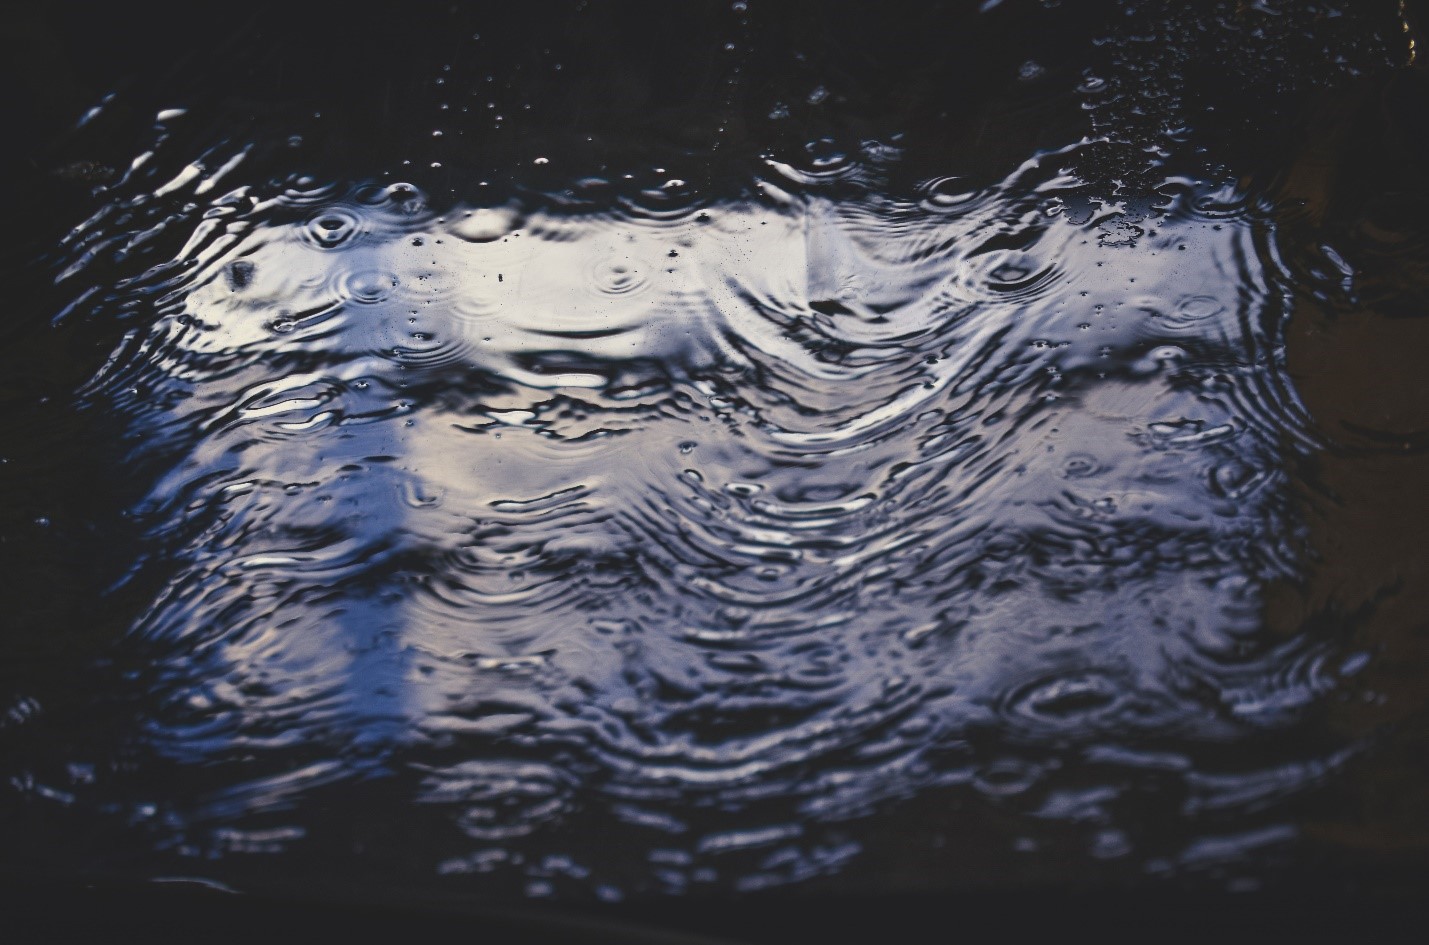 Contact water damage services before heavy rainstorms